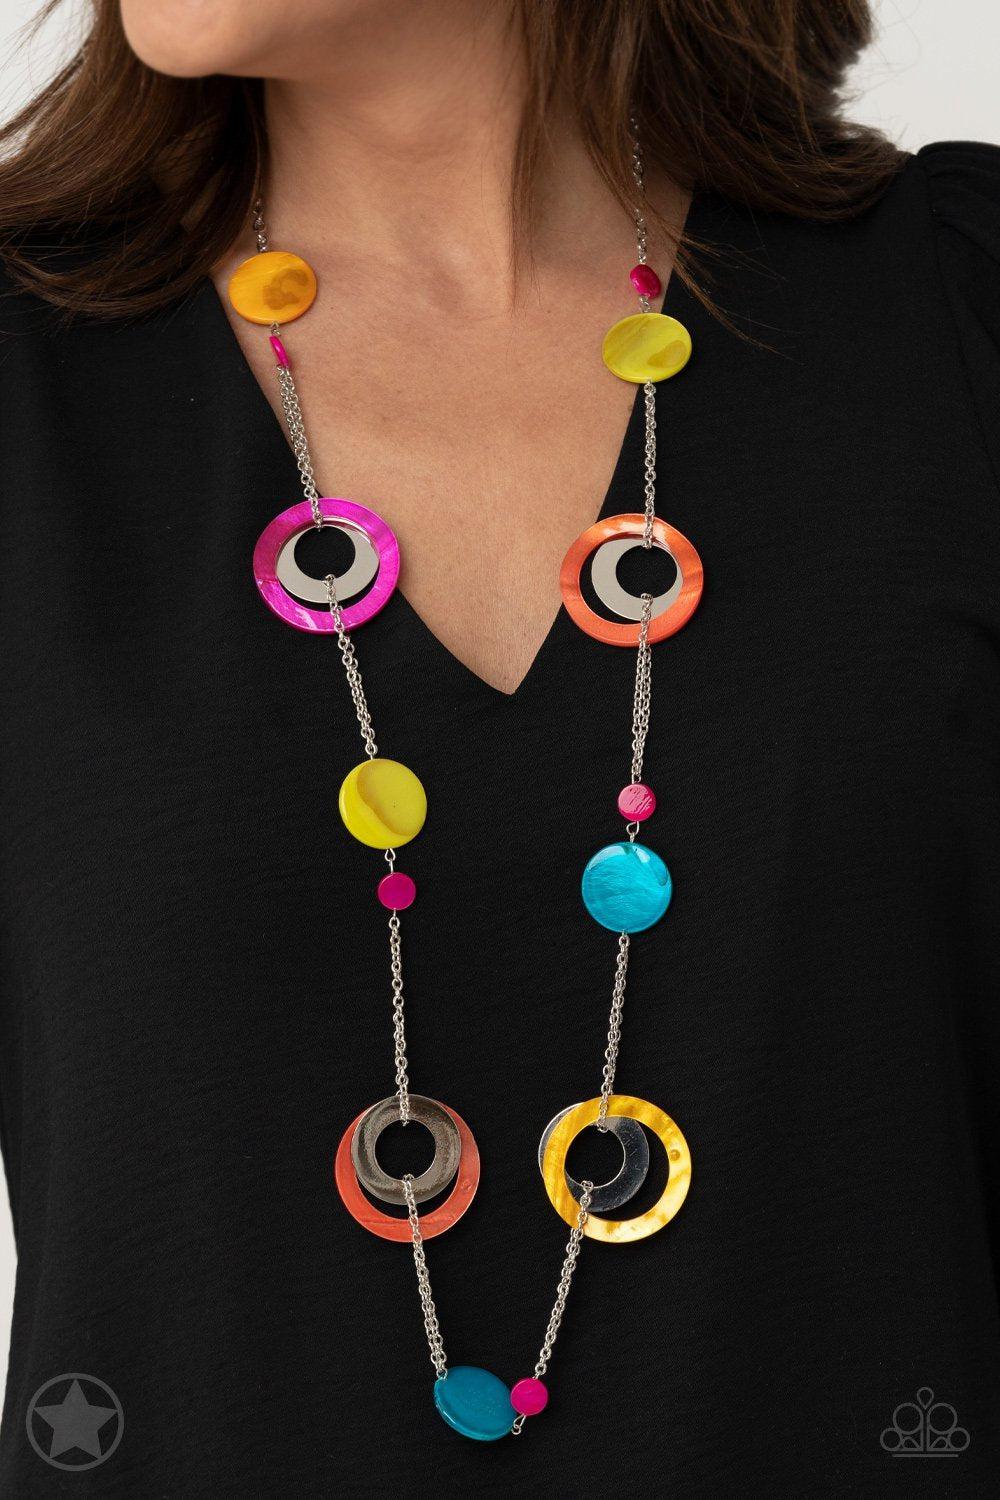 Kaleidoscopically Captivating Multi-color Necklace - Paparazzi Accessories - model -CarasShop.com - $5 Jewelry by Cara Jewels